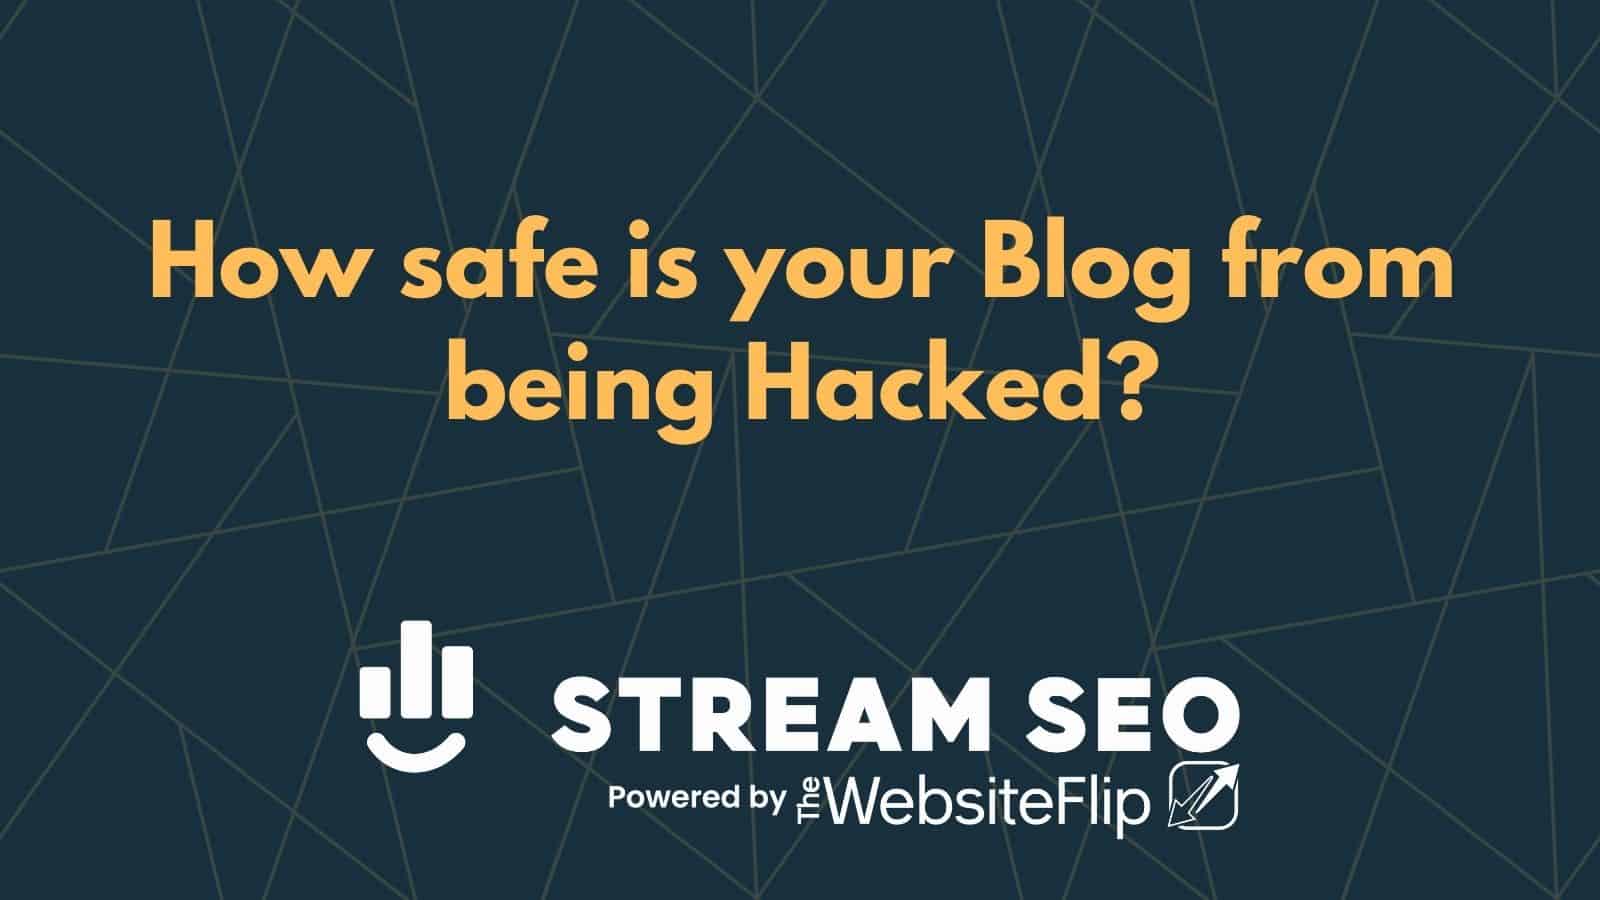 How safe is your Blog from being Hacked?